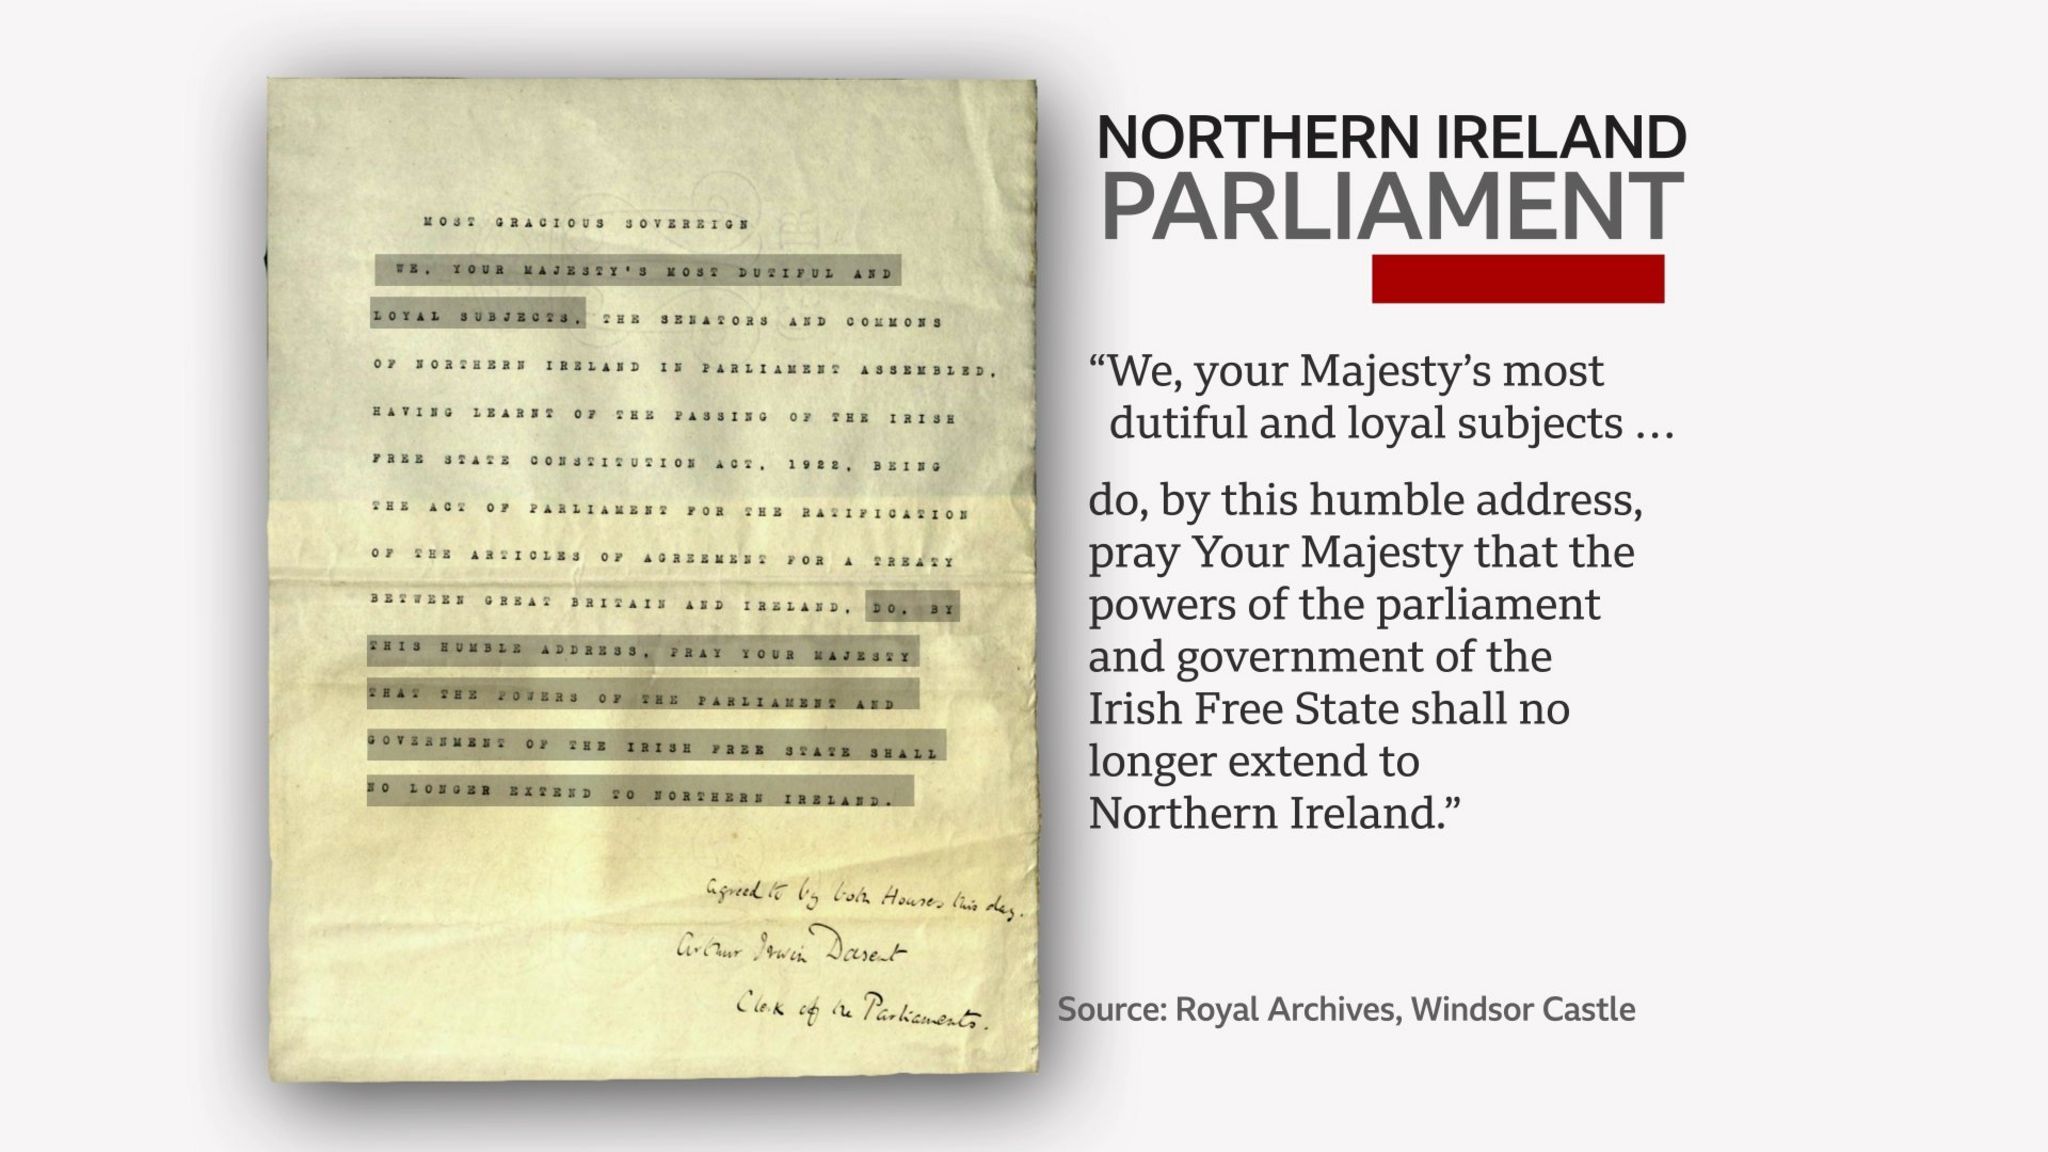 A copy of the address sent to King George V by the Northern Ireland Parliament in December 1922